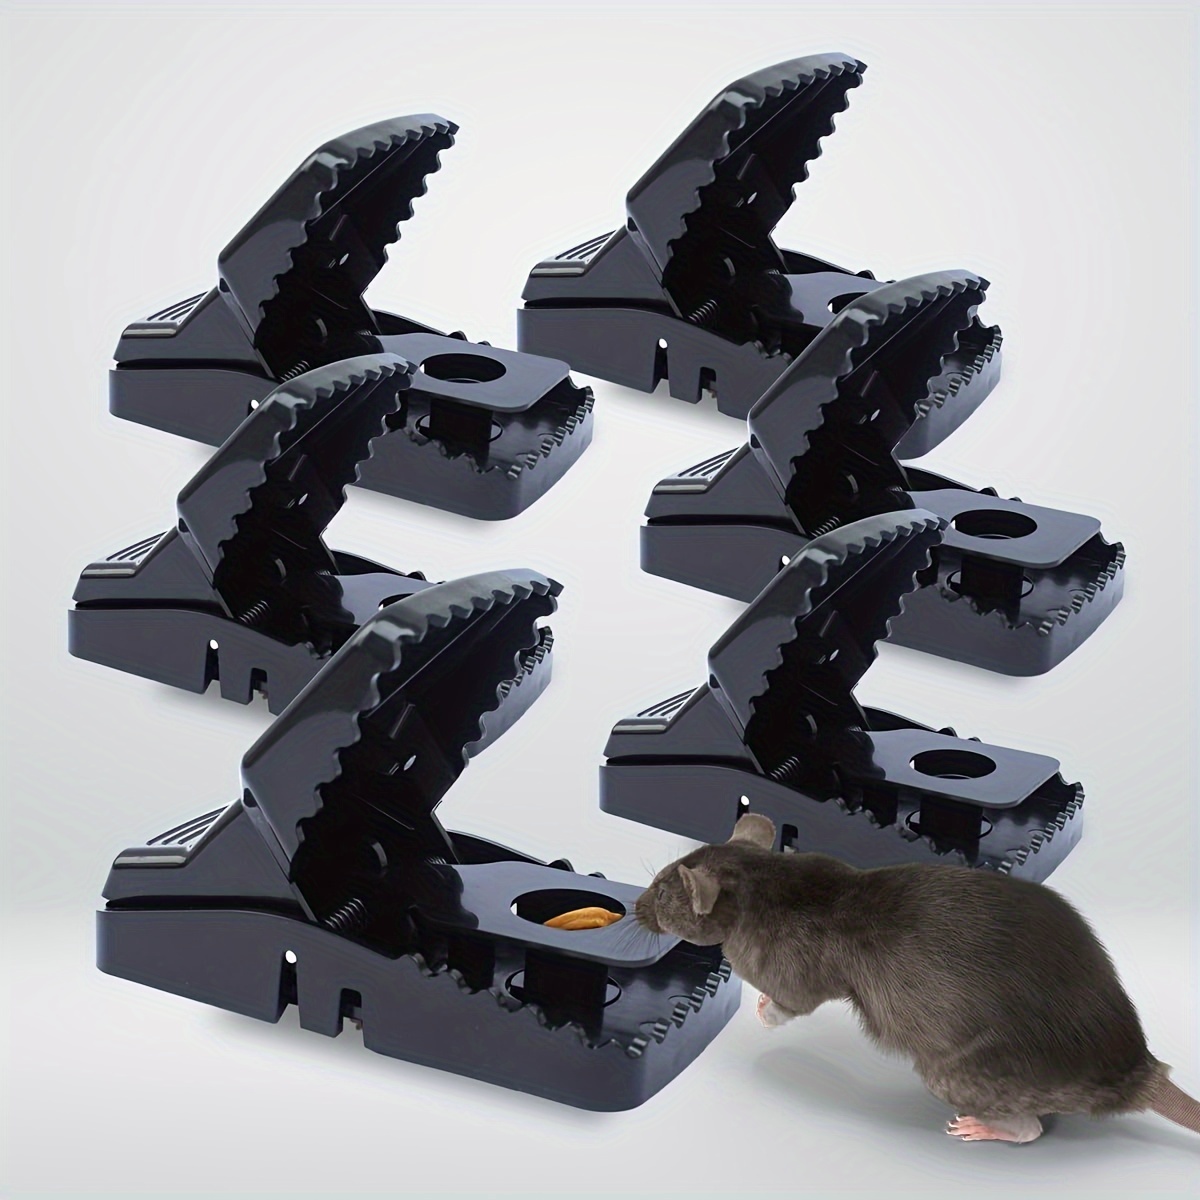  Mouse Traps,Mice Traps for House,Small Rat Traps That